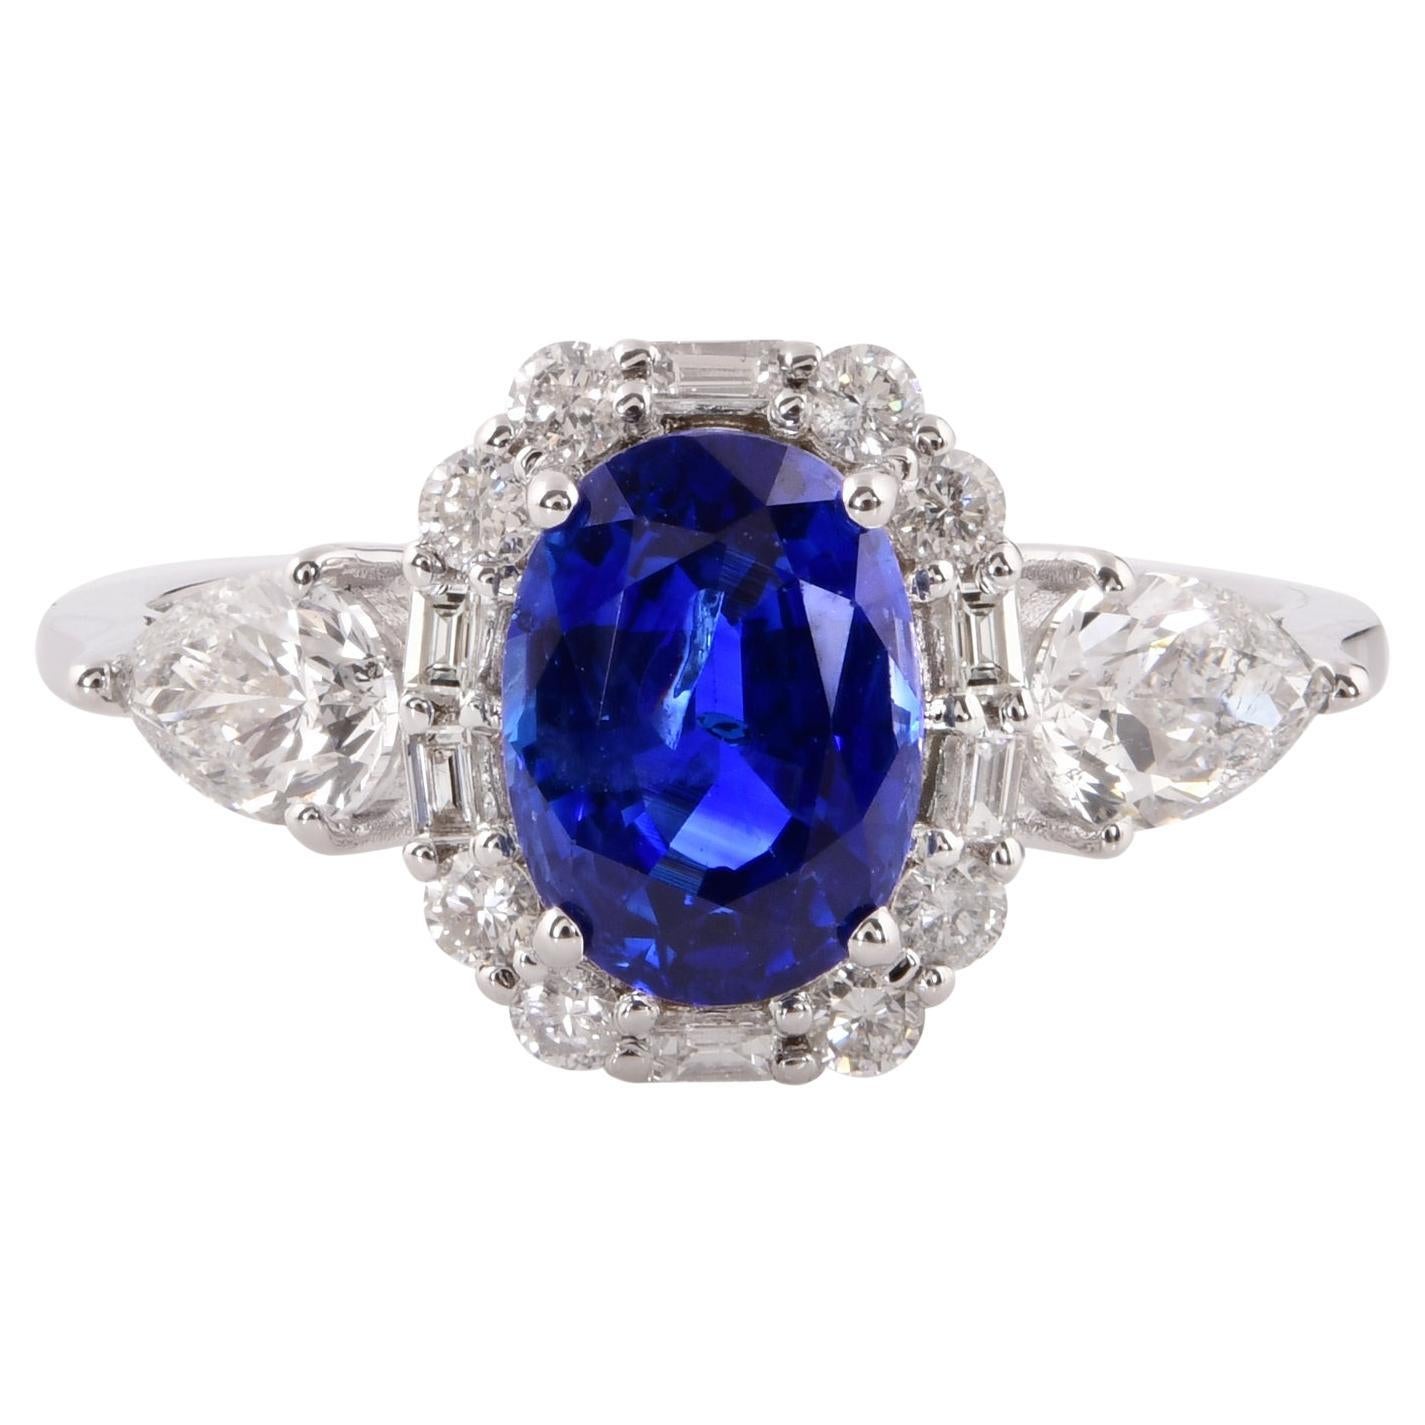 Real Blue Sapphire Cocktail Ring SI Clarity HI Color Diamond 14 Karat White Gold